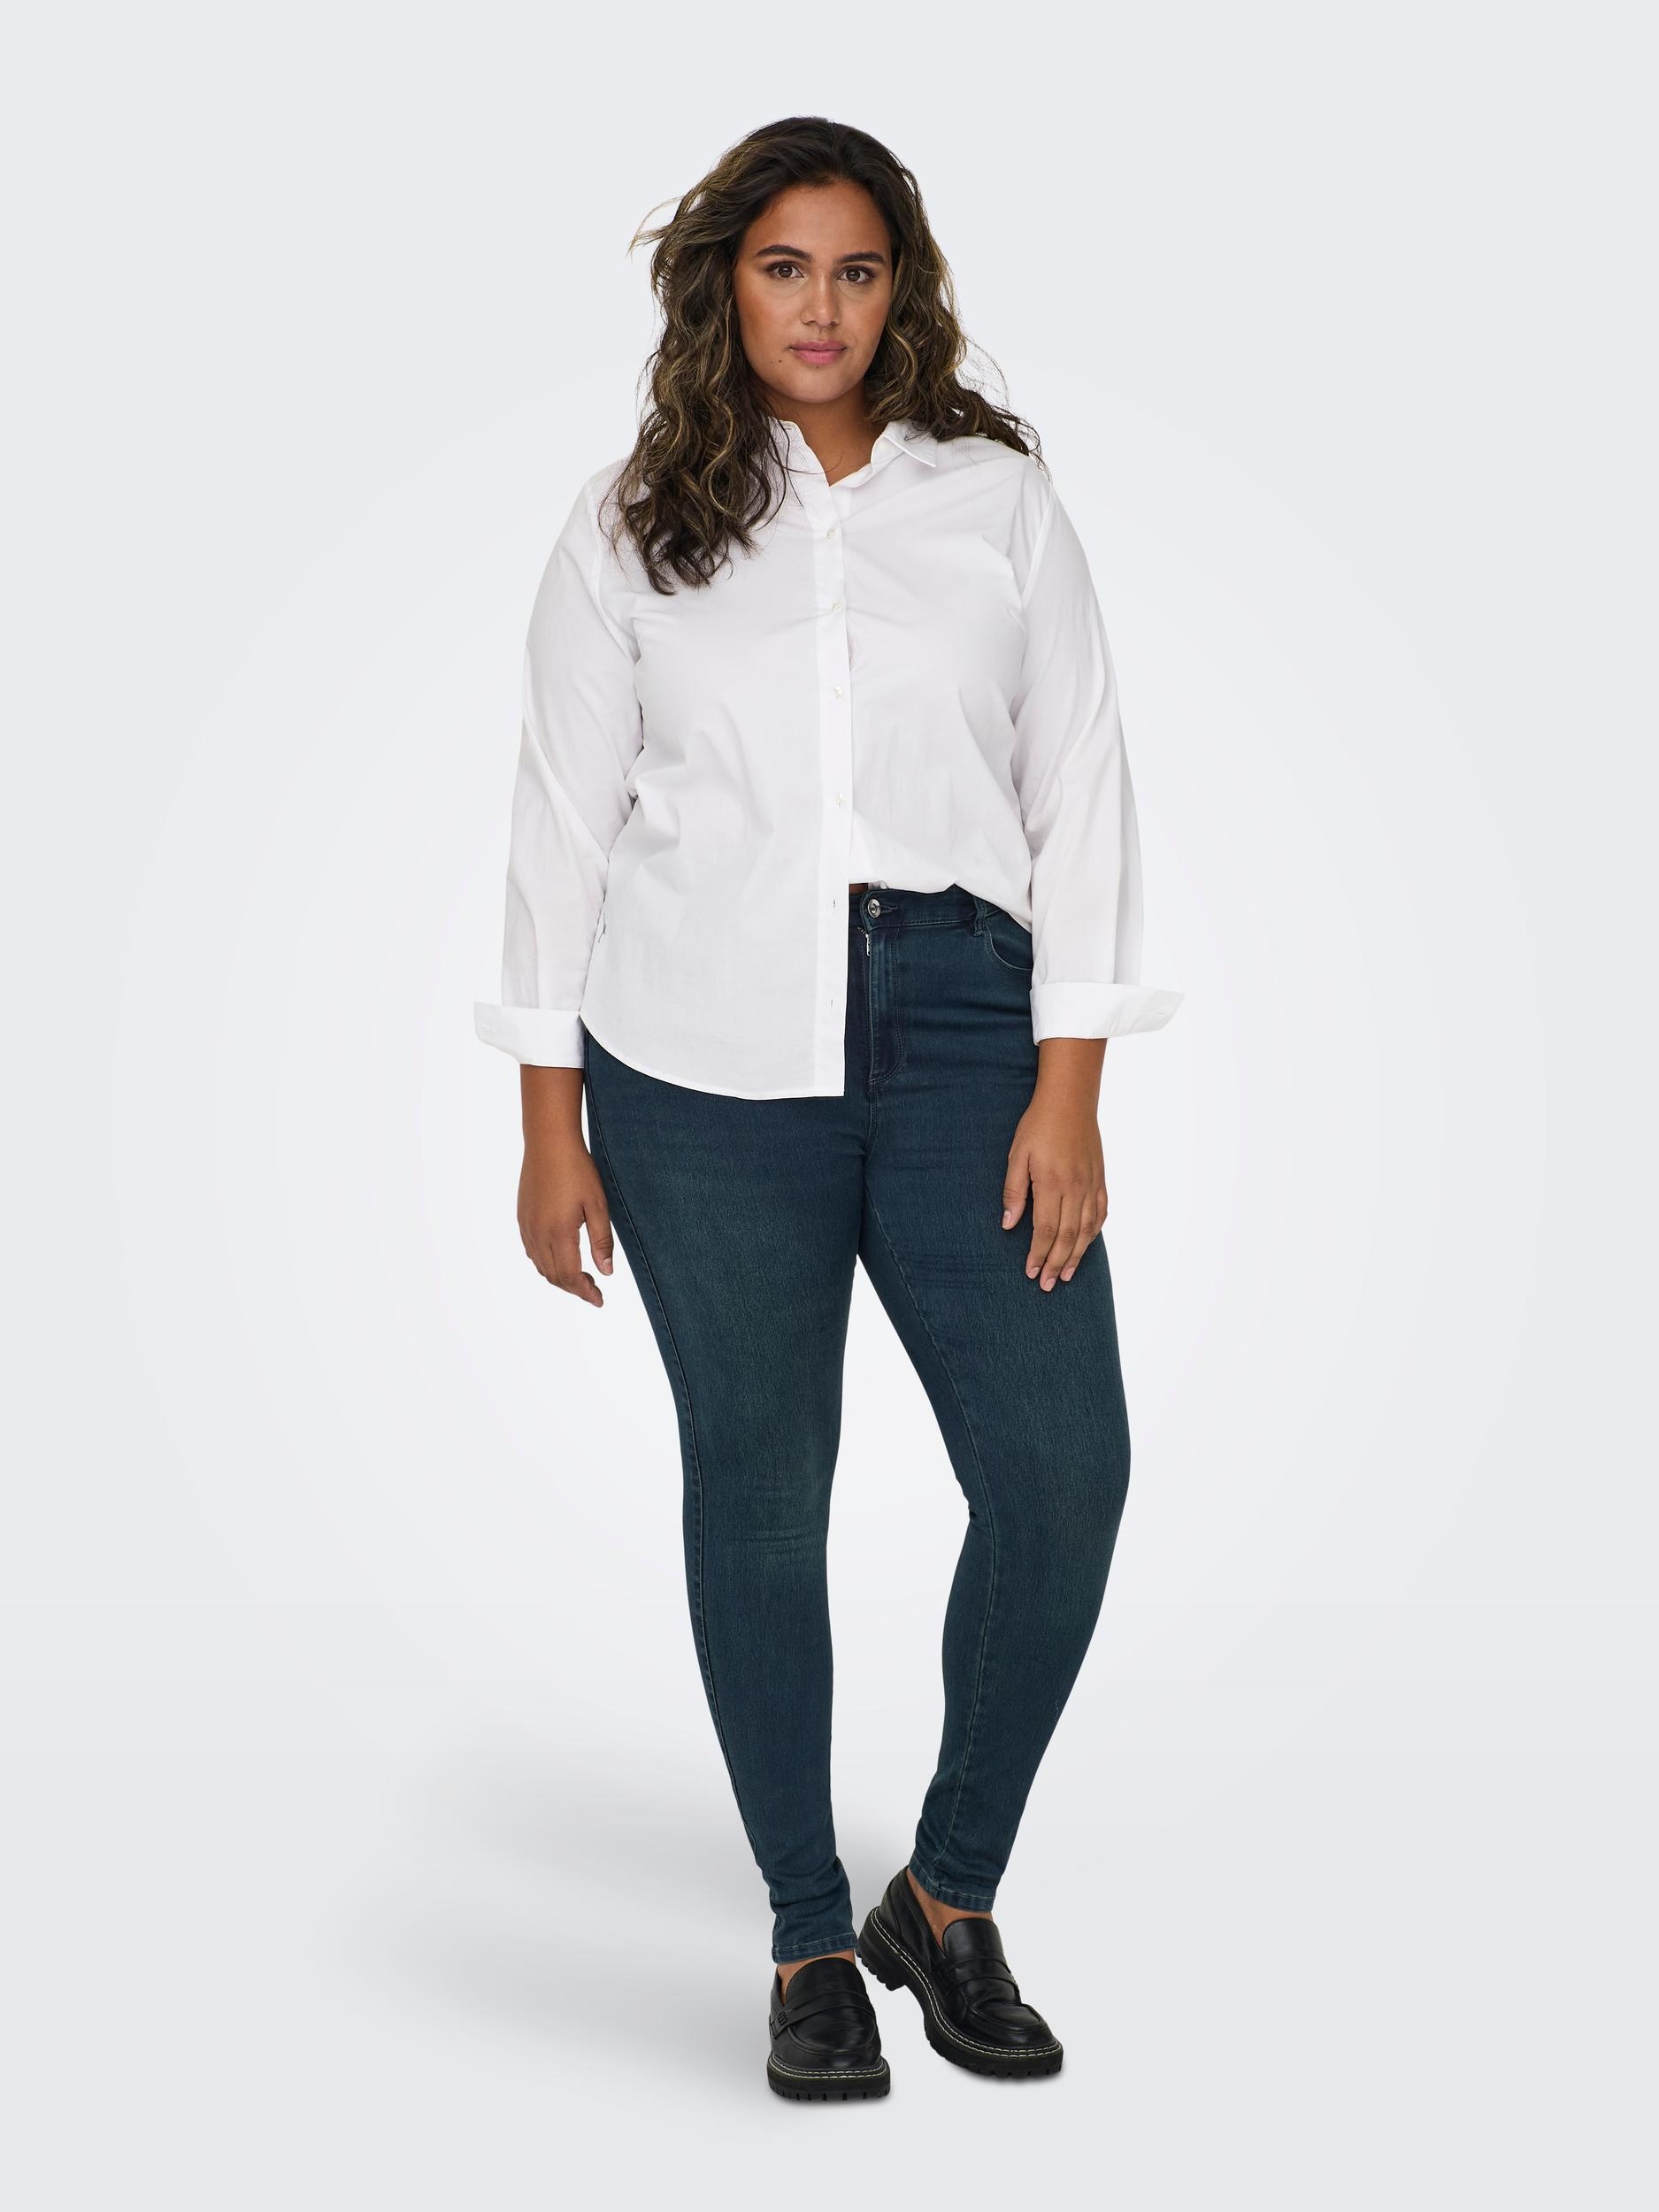 SKINNY DNM OTTO »CARAUGUSTA NOOS« CARMAKOMA bei HW ONLY Skinny-fit-Jeans BJ558